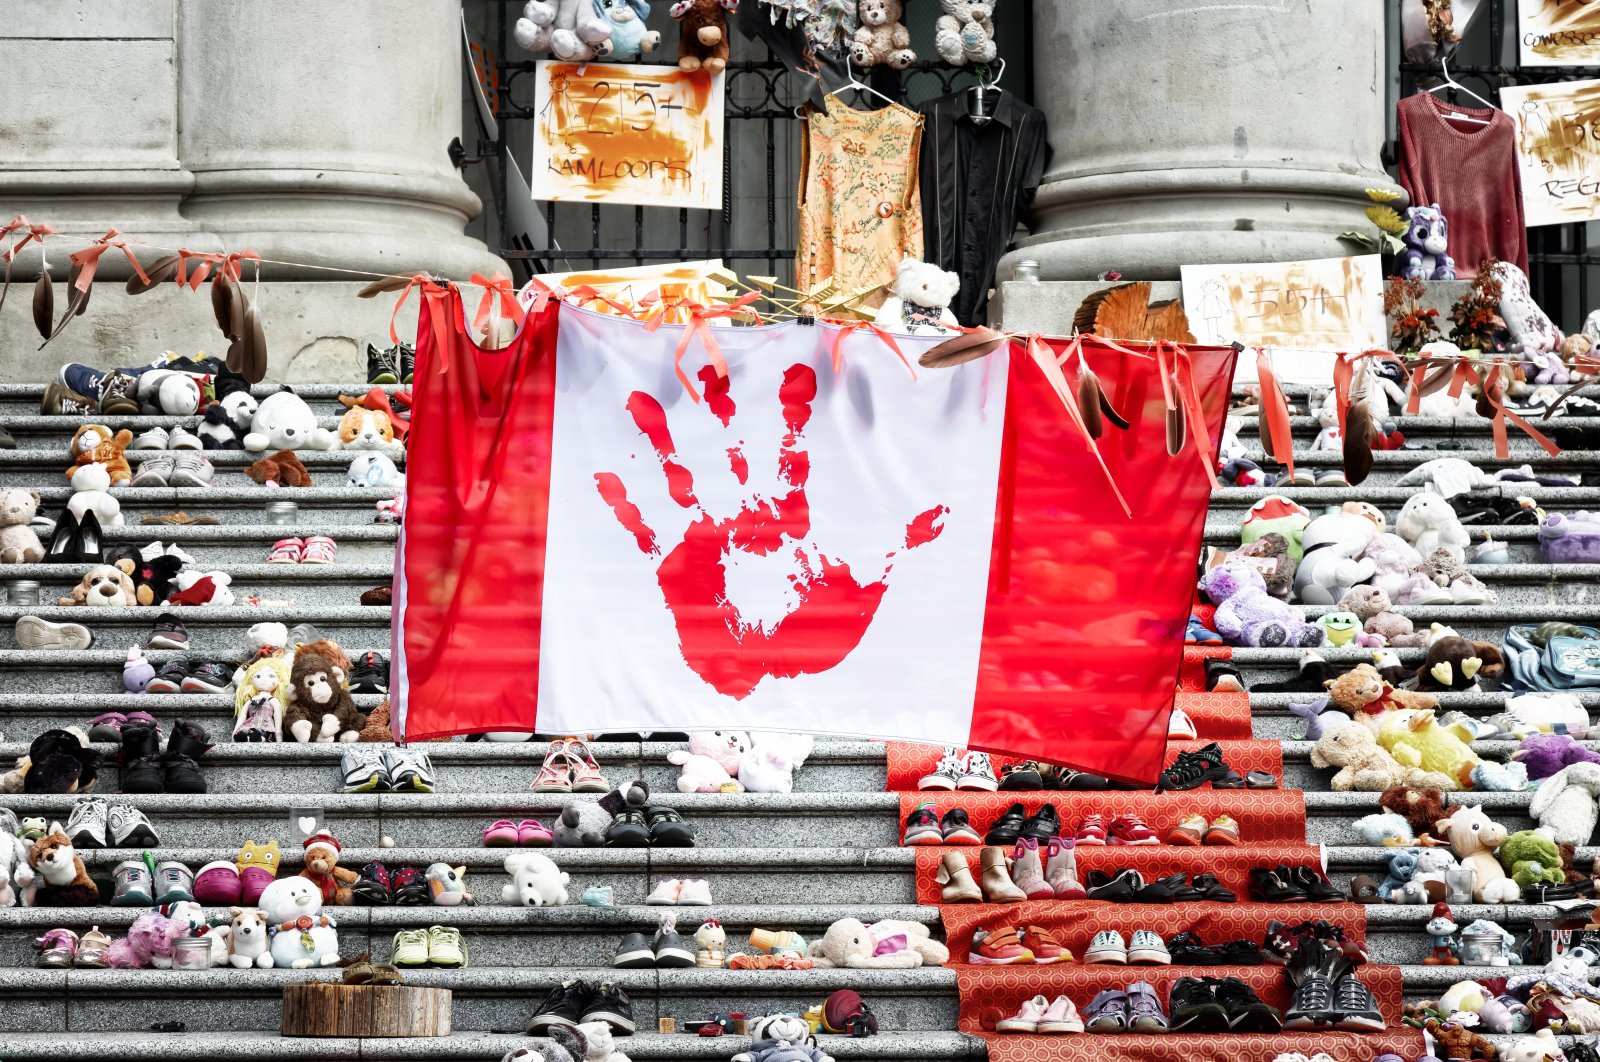 A memorial for the morning of the First Nation Kids at the Art Gallery Downtown Vancouver, British Columbia, Canada, Aug. 28, 2021. (Shutterstock Photo)